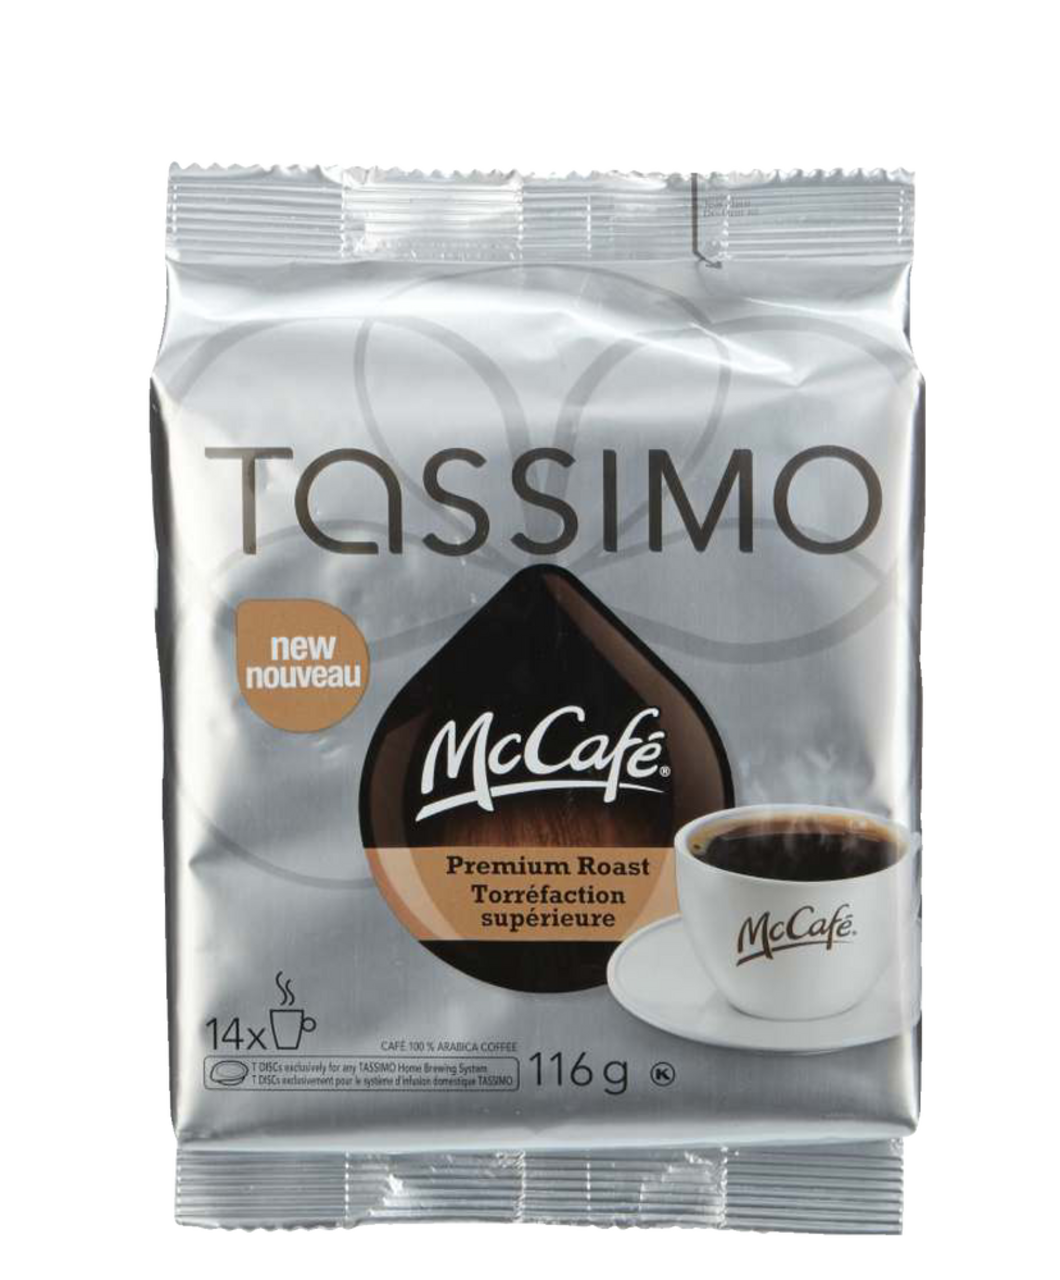 https://media-www.canadiantire.ca/product/living/food-drink/single-serve-beverages/0535266/tassimo-mccafe-14-pk-7bee6e4f-4b26-4e1e-9f8b-45794b9dc43b.png?imdensity=1&imwidth=640&impolicy=mZoom